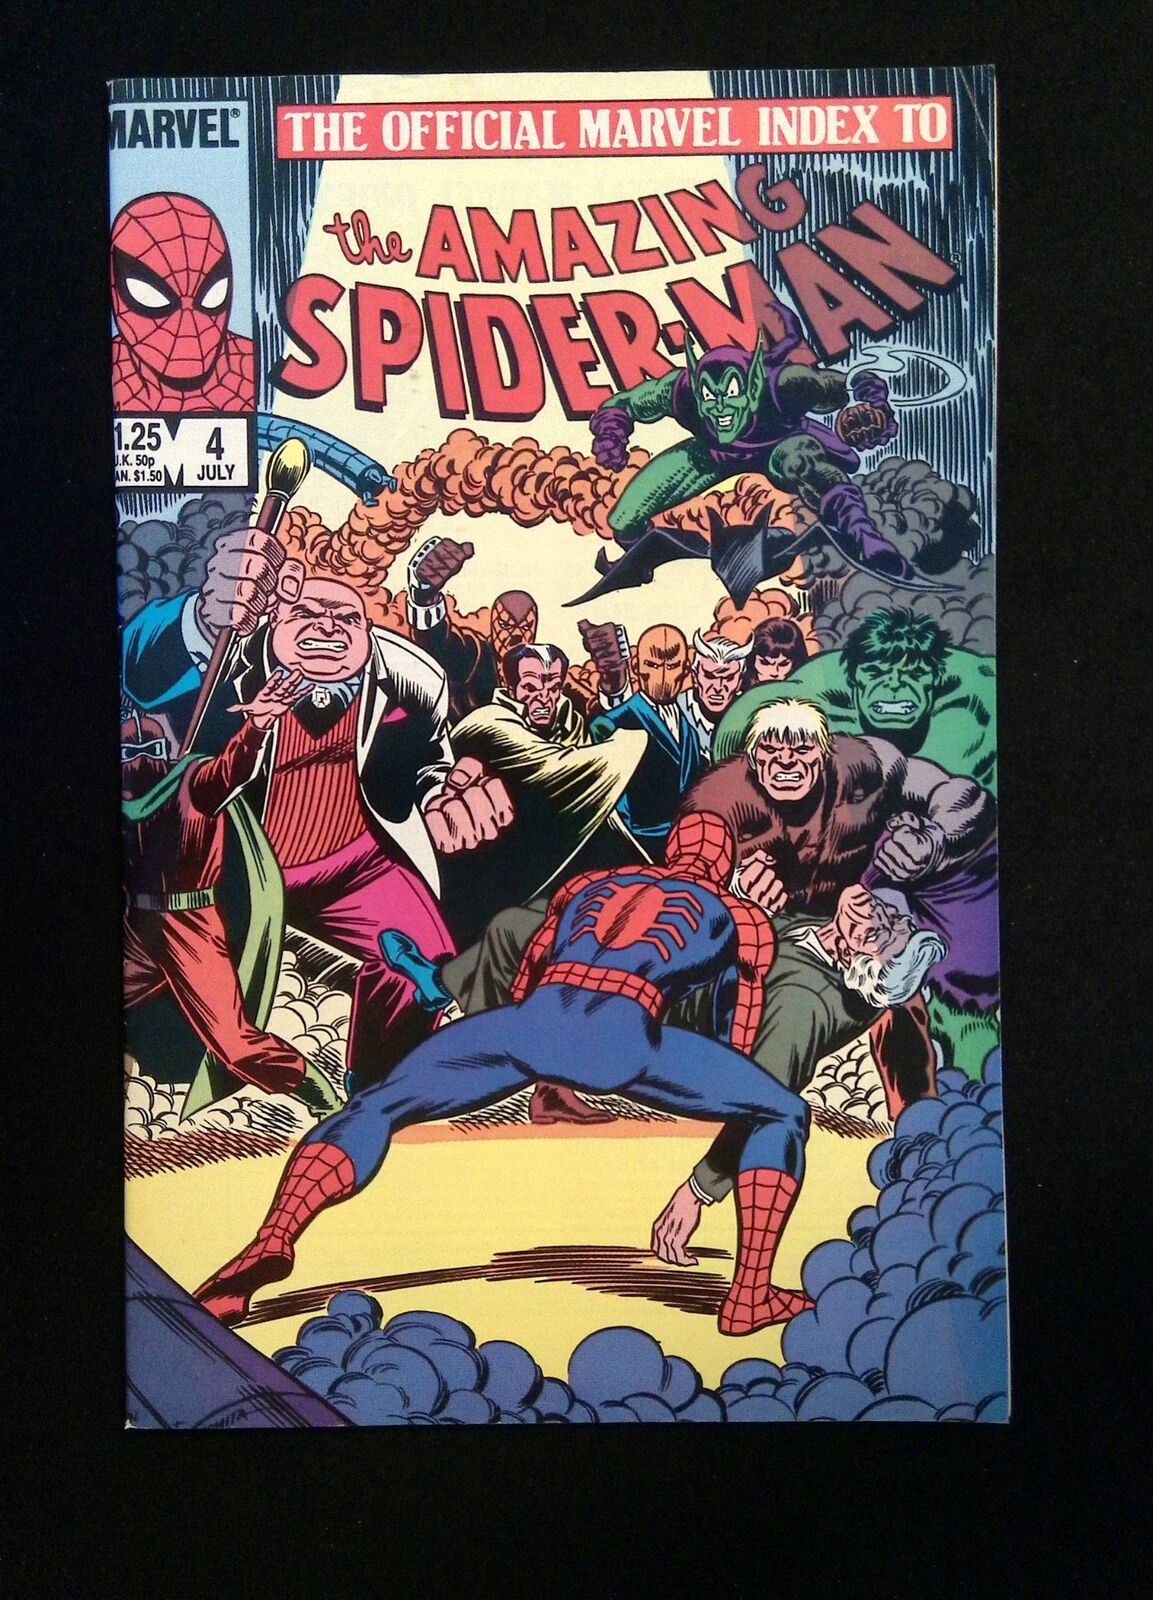 Official Marvel Index  To Amazing Spider-Man #4  MARVEL Comics 1985 VF+